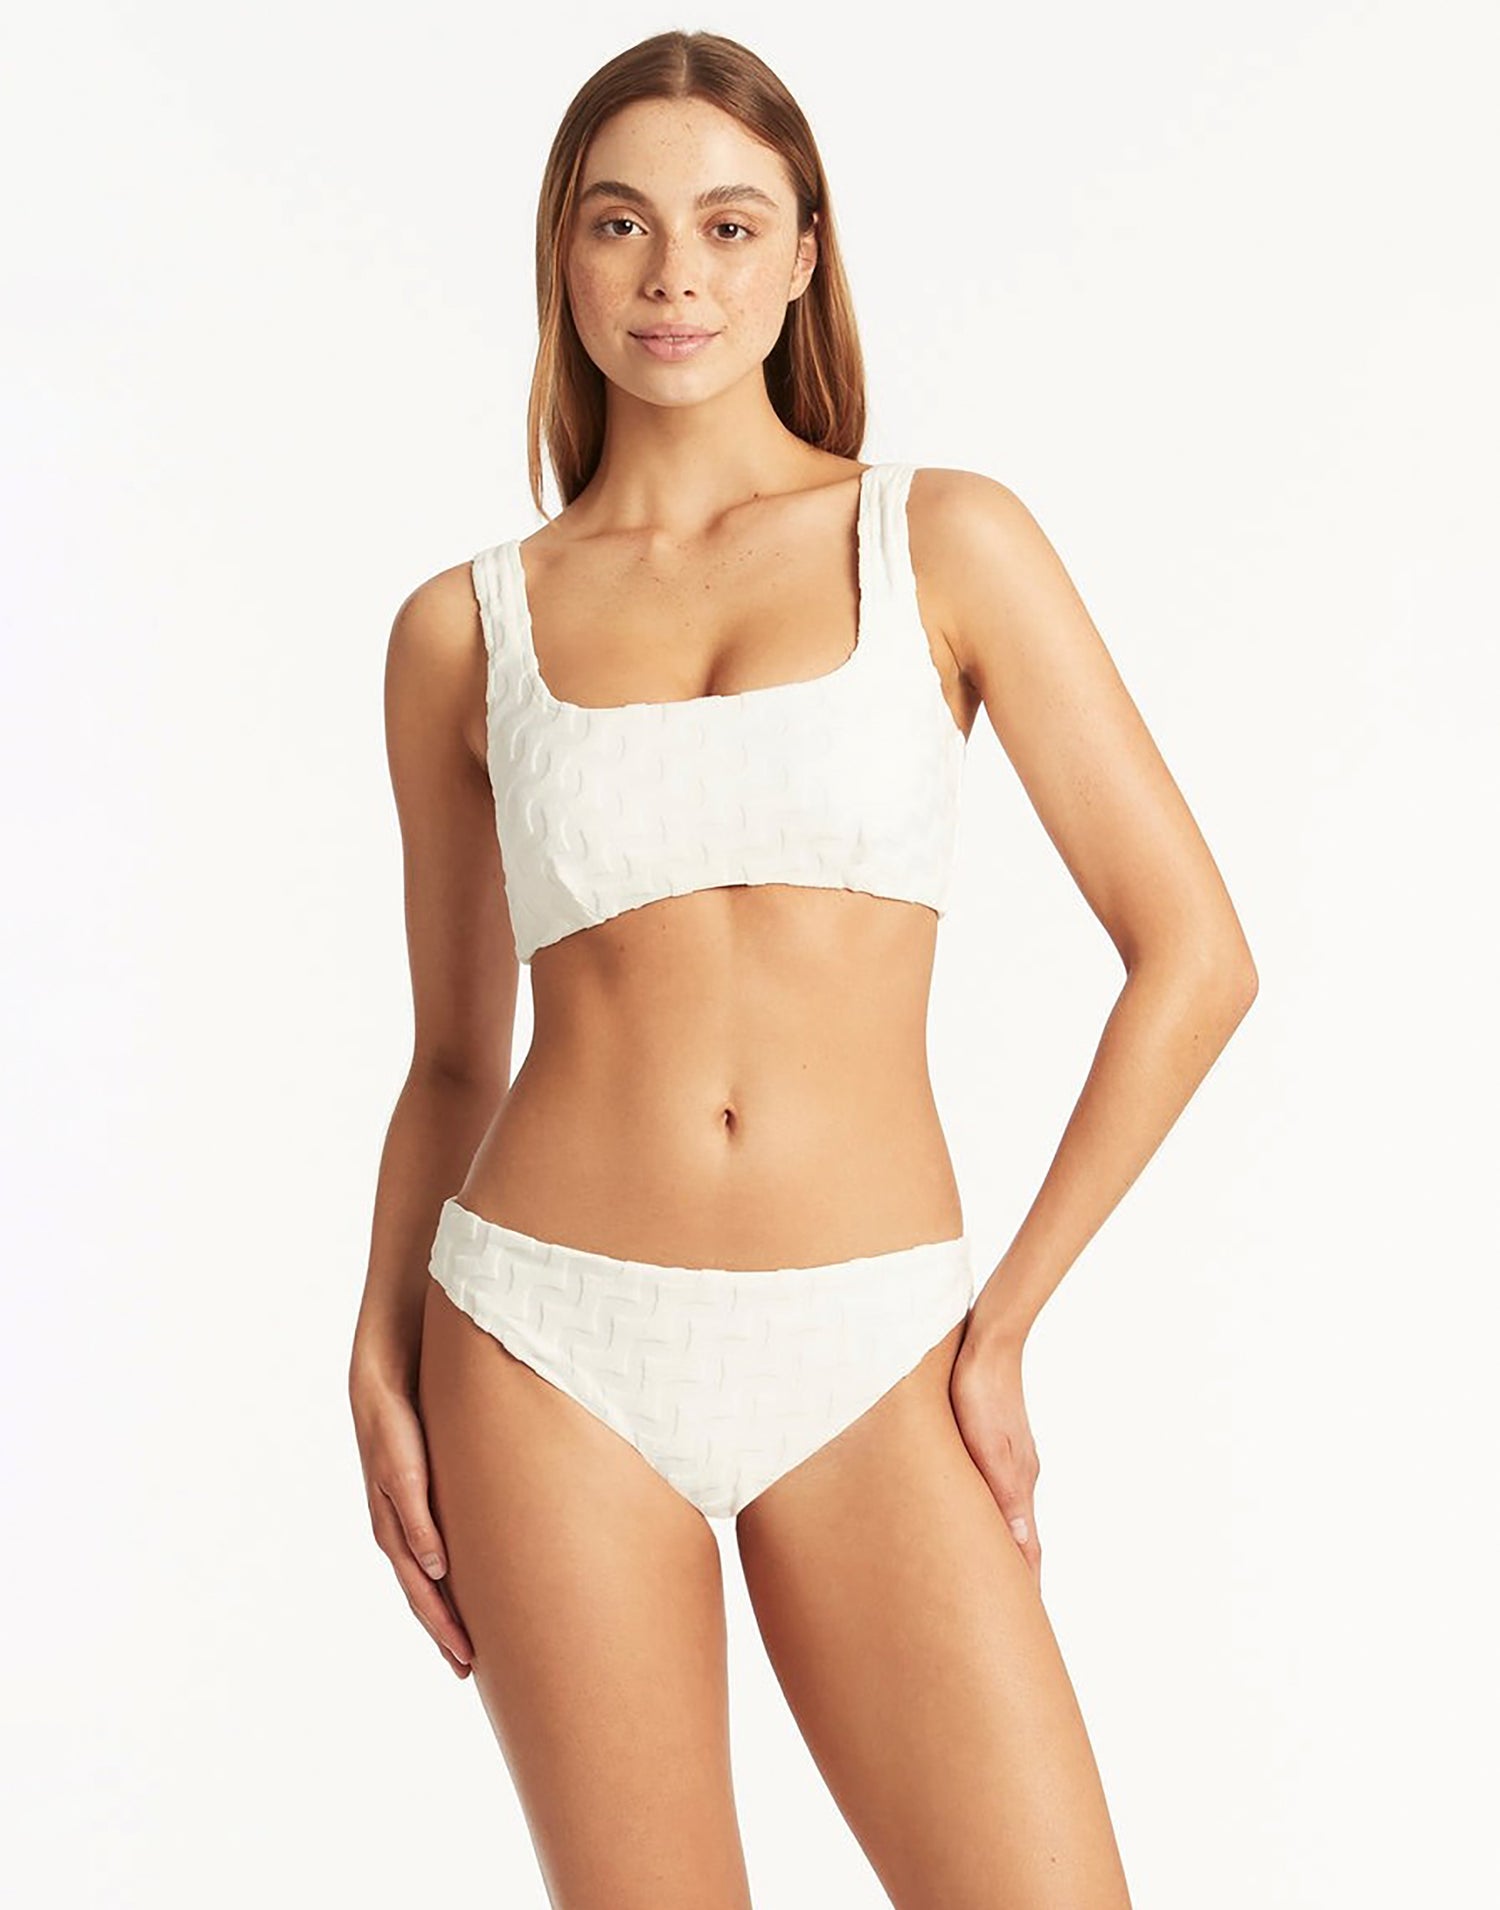 Oceano Low Square Neck Bralette Top by Sea Level in White - Front View